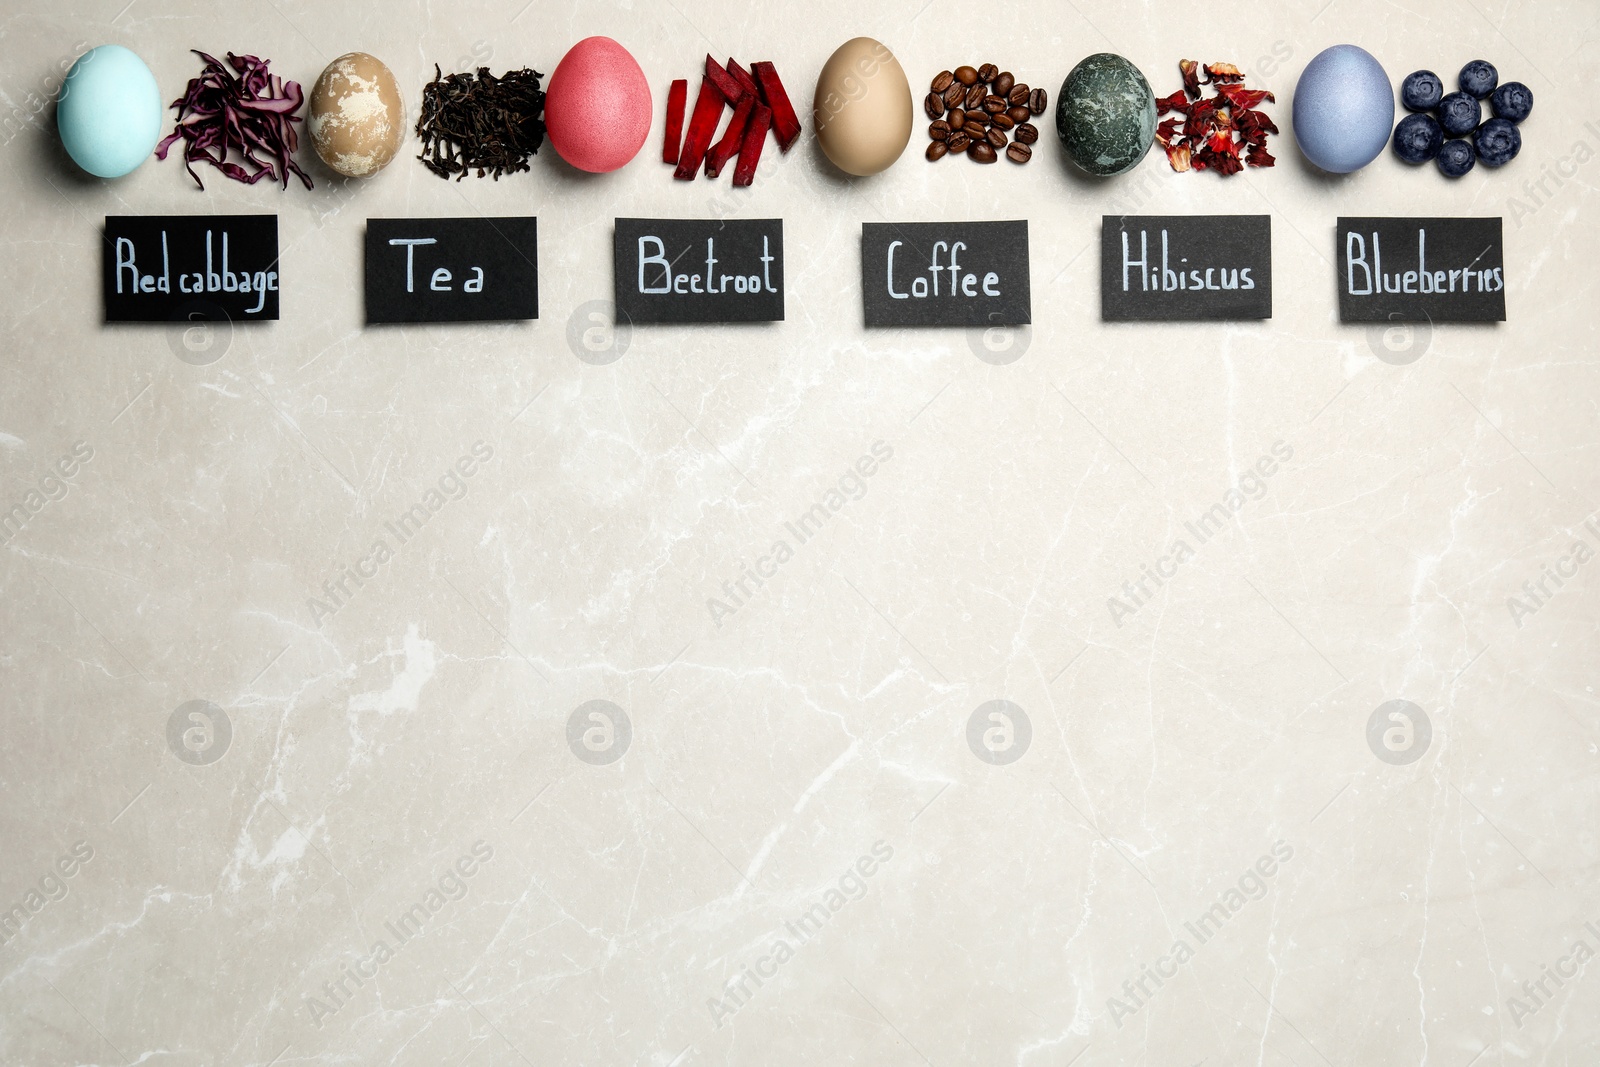 Photo of Easter eggs painted with natural organic dyes and labels on light grey table, flat lay. Red cabbage, tea, beetroot, coffee beans, hibiscus, blueberries used for coloring. Space for text